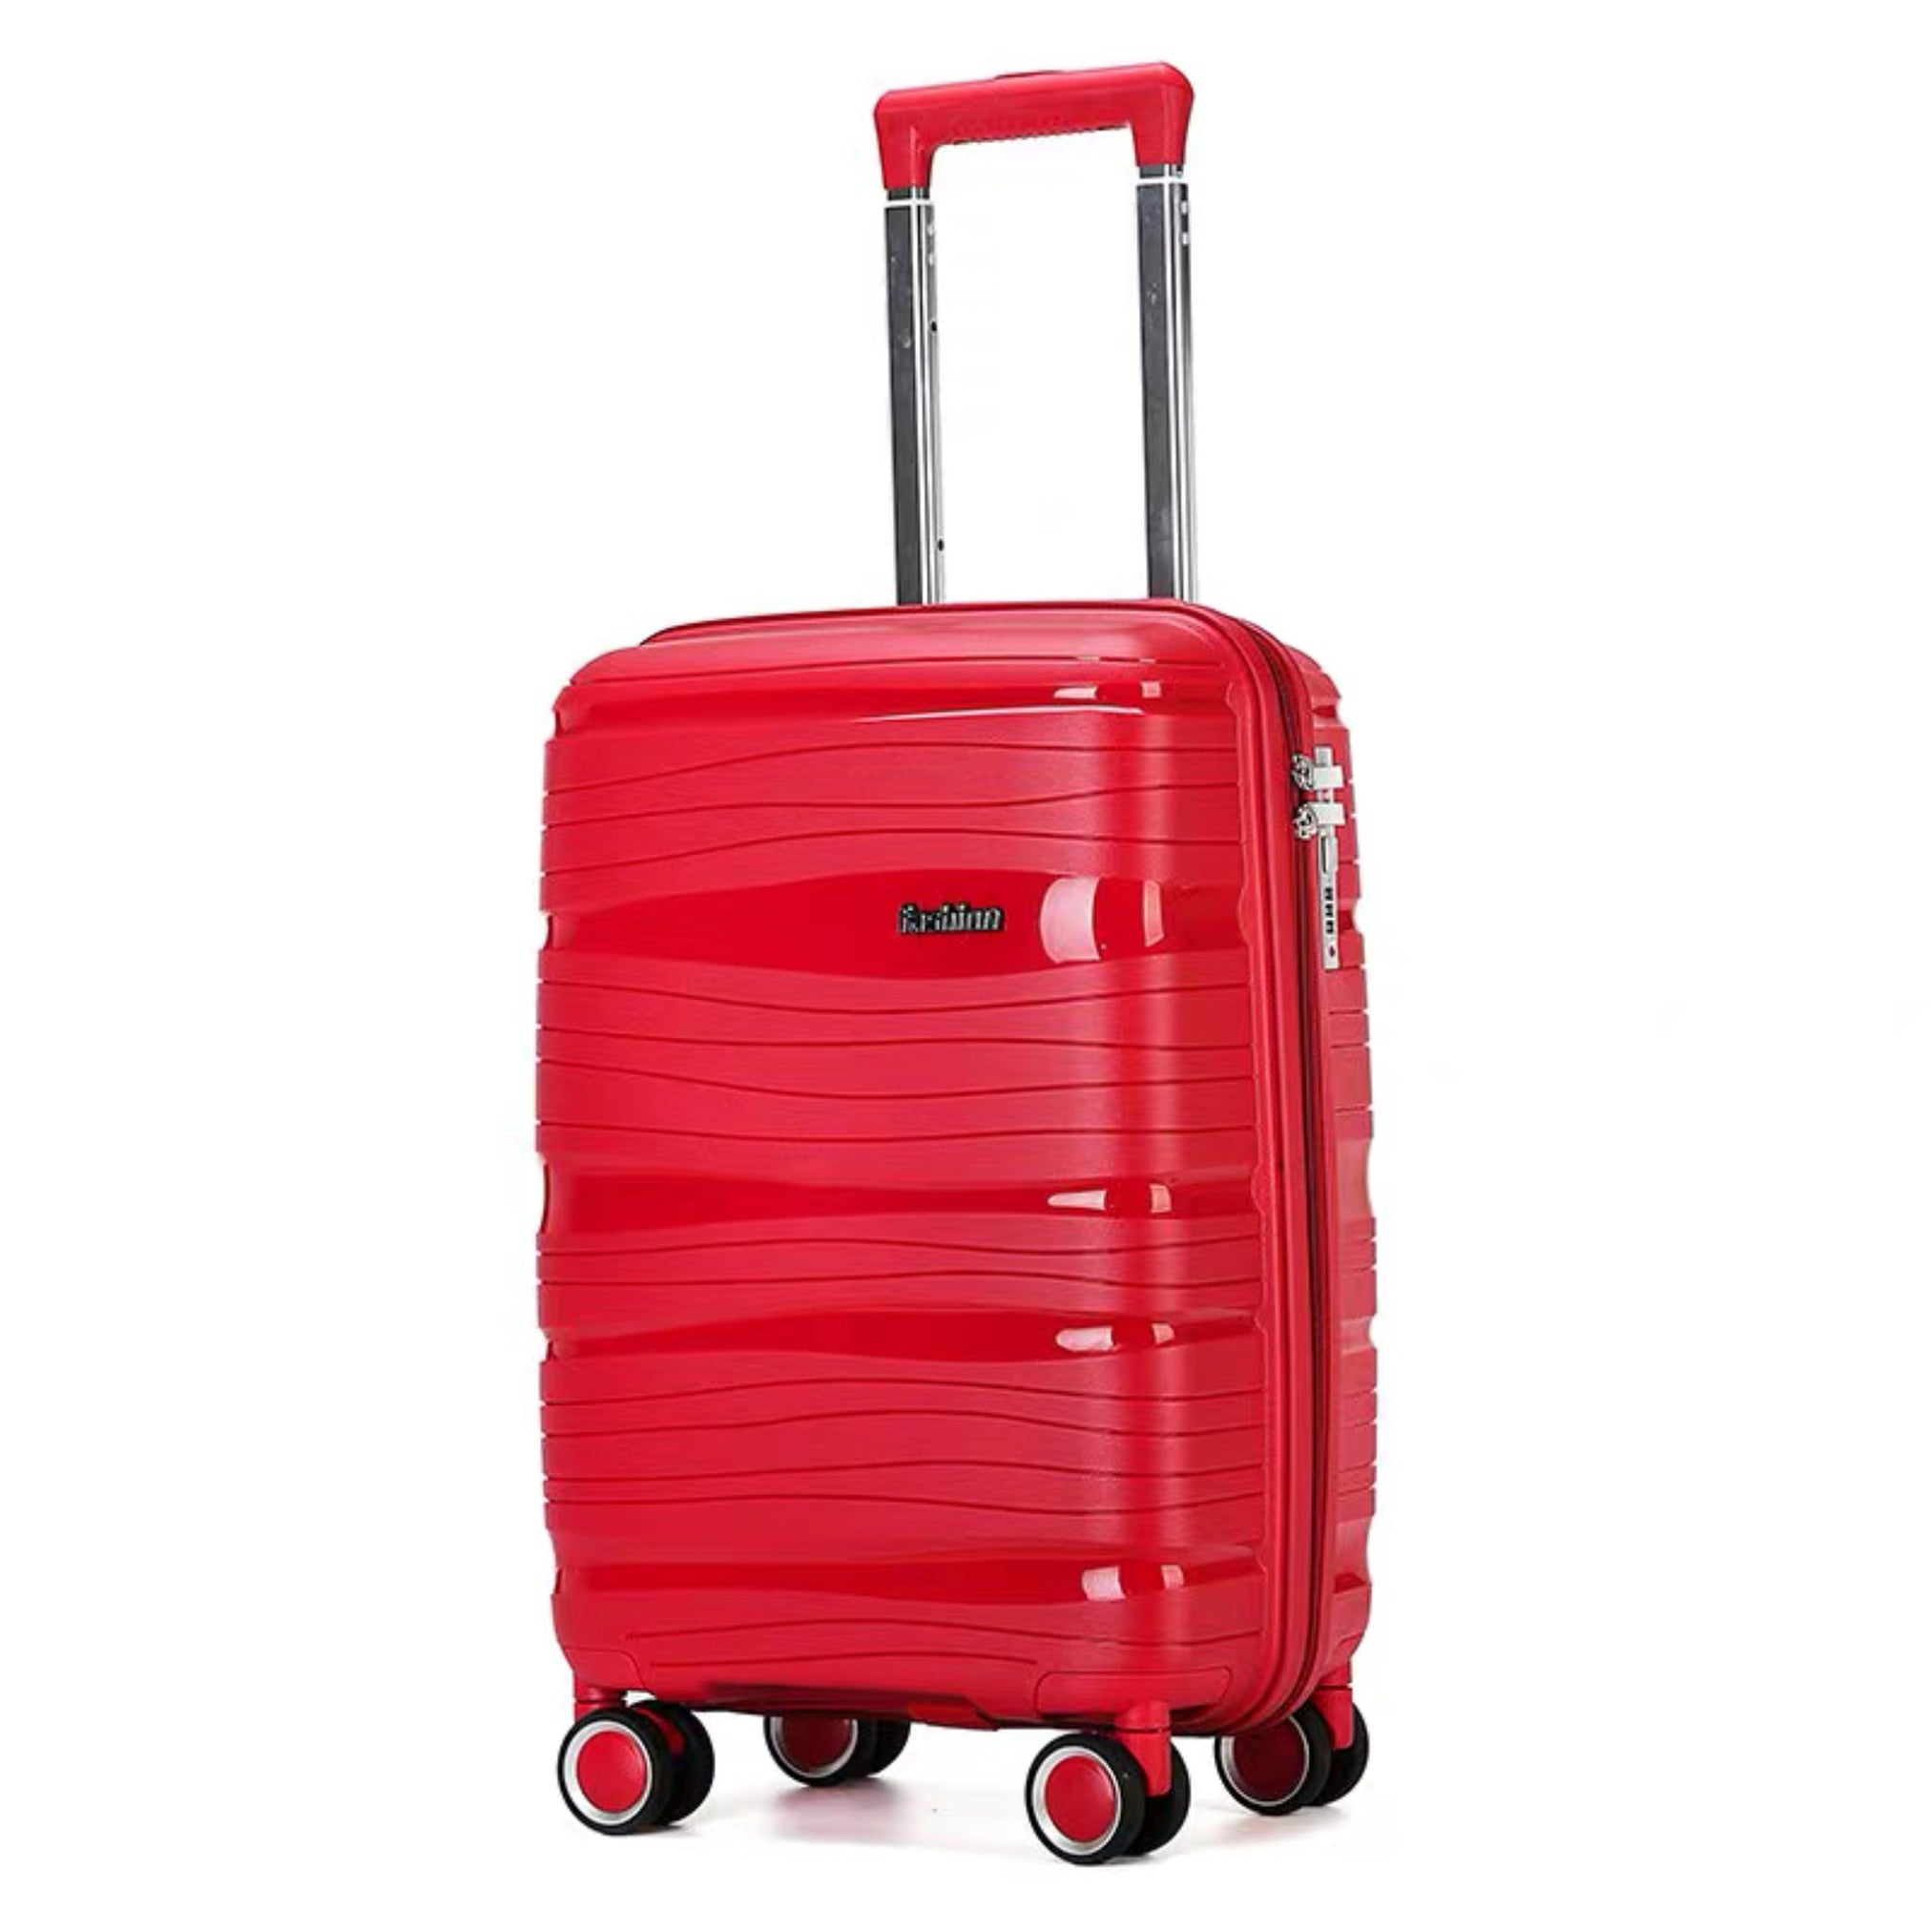 24" Red Colour Royal PP Luggage Lightweight Hard Case Trolley Bag with Double Spinner Wheel